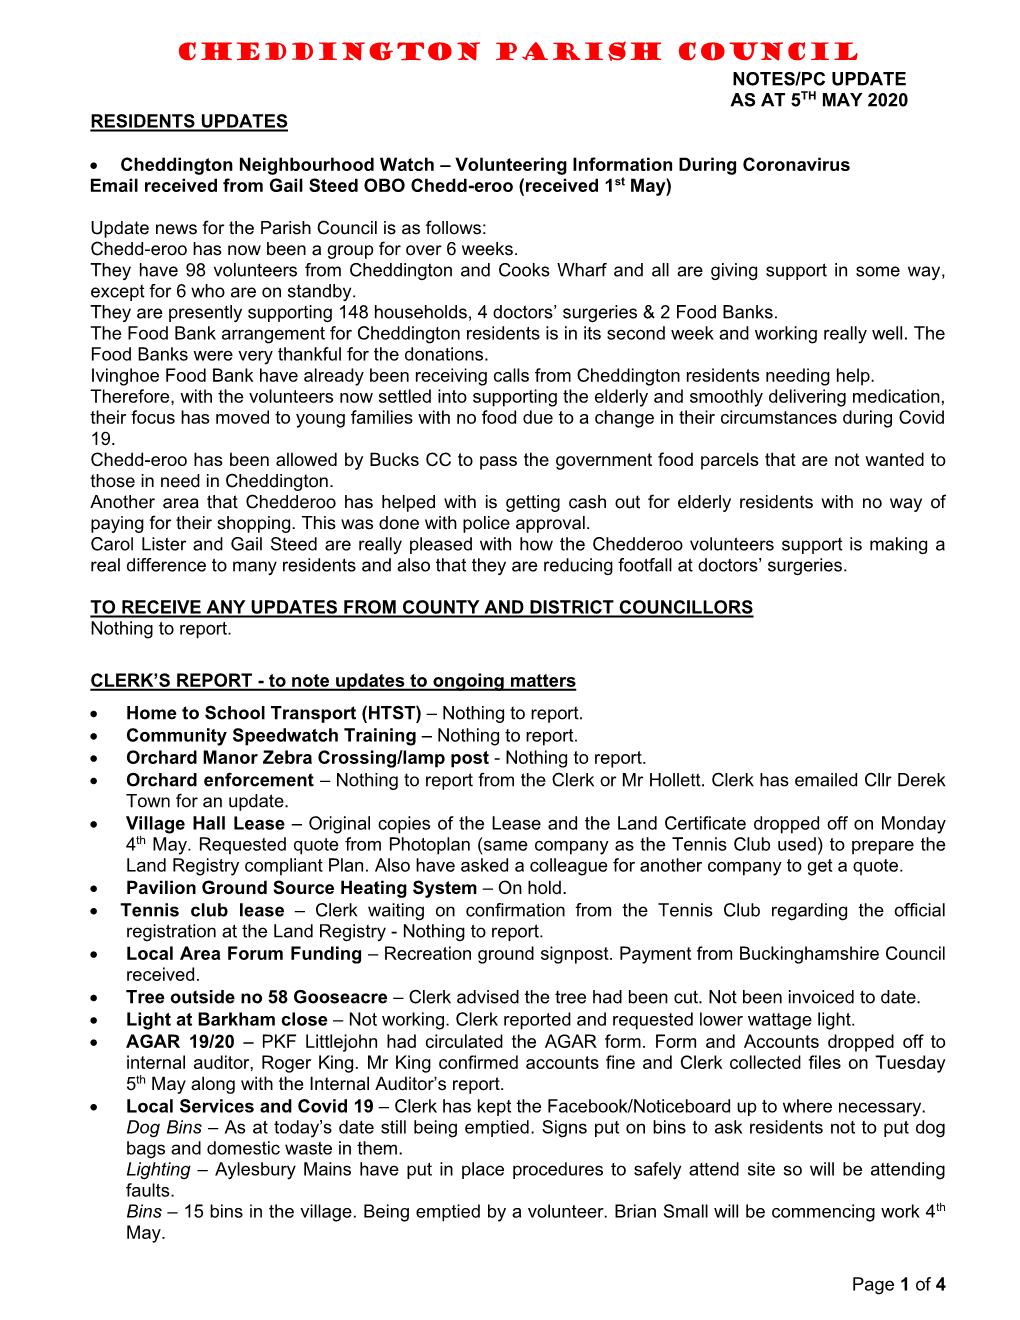 Cheddington Parish Council Notes/Pc Update As at 5Th May 2020 Residents Updates